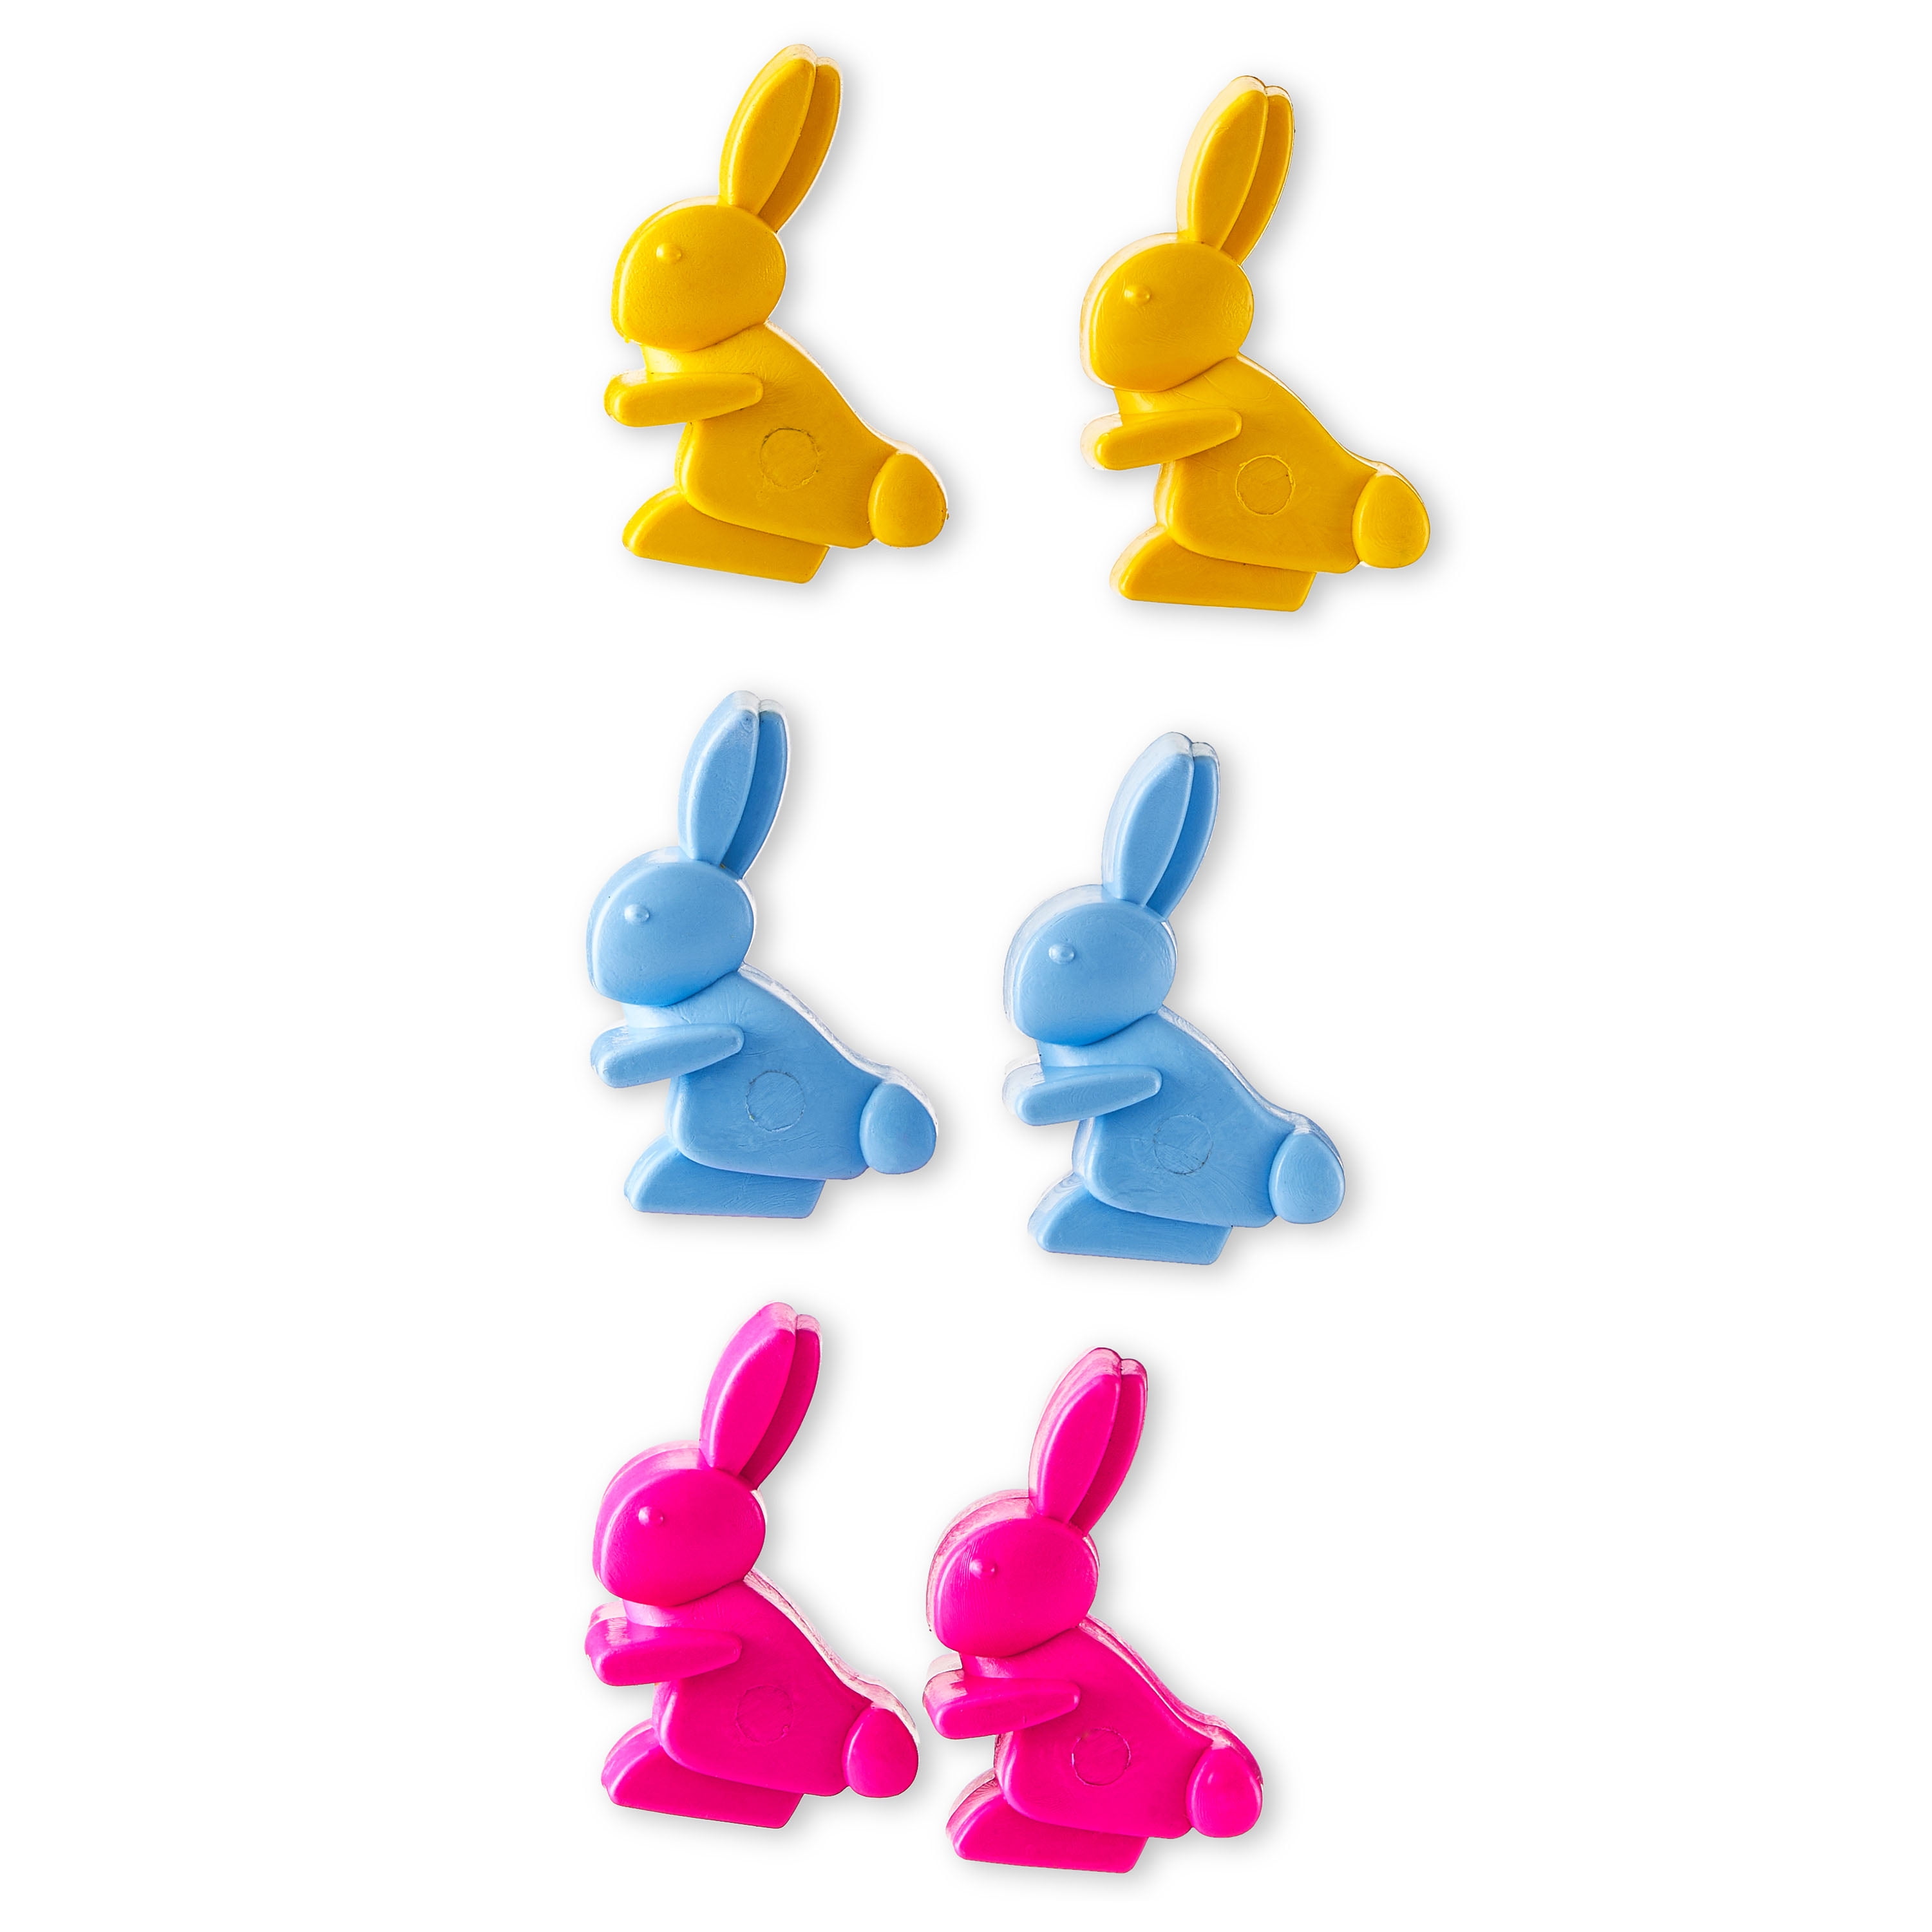 WAY TO CELEBRATE! Way To Celebrate Easter Bunny Crayons Party Favors, 6 Count